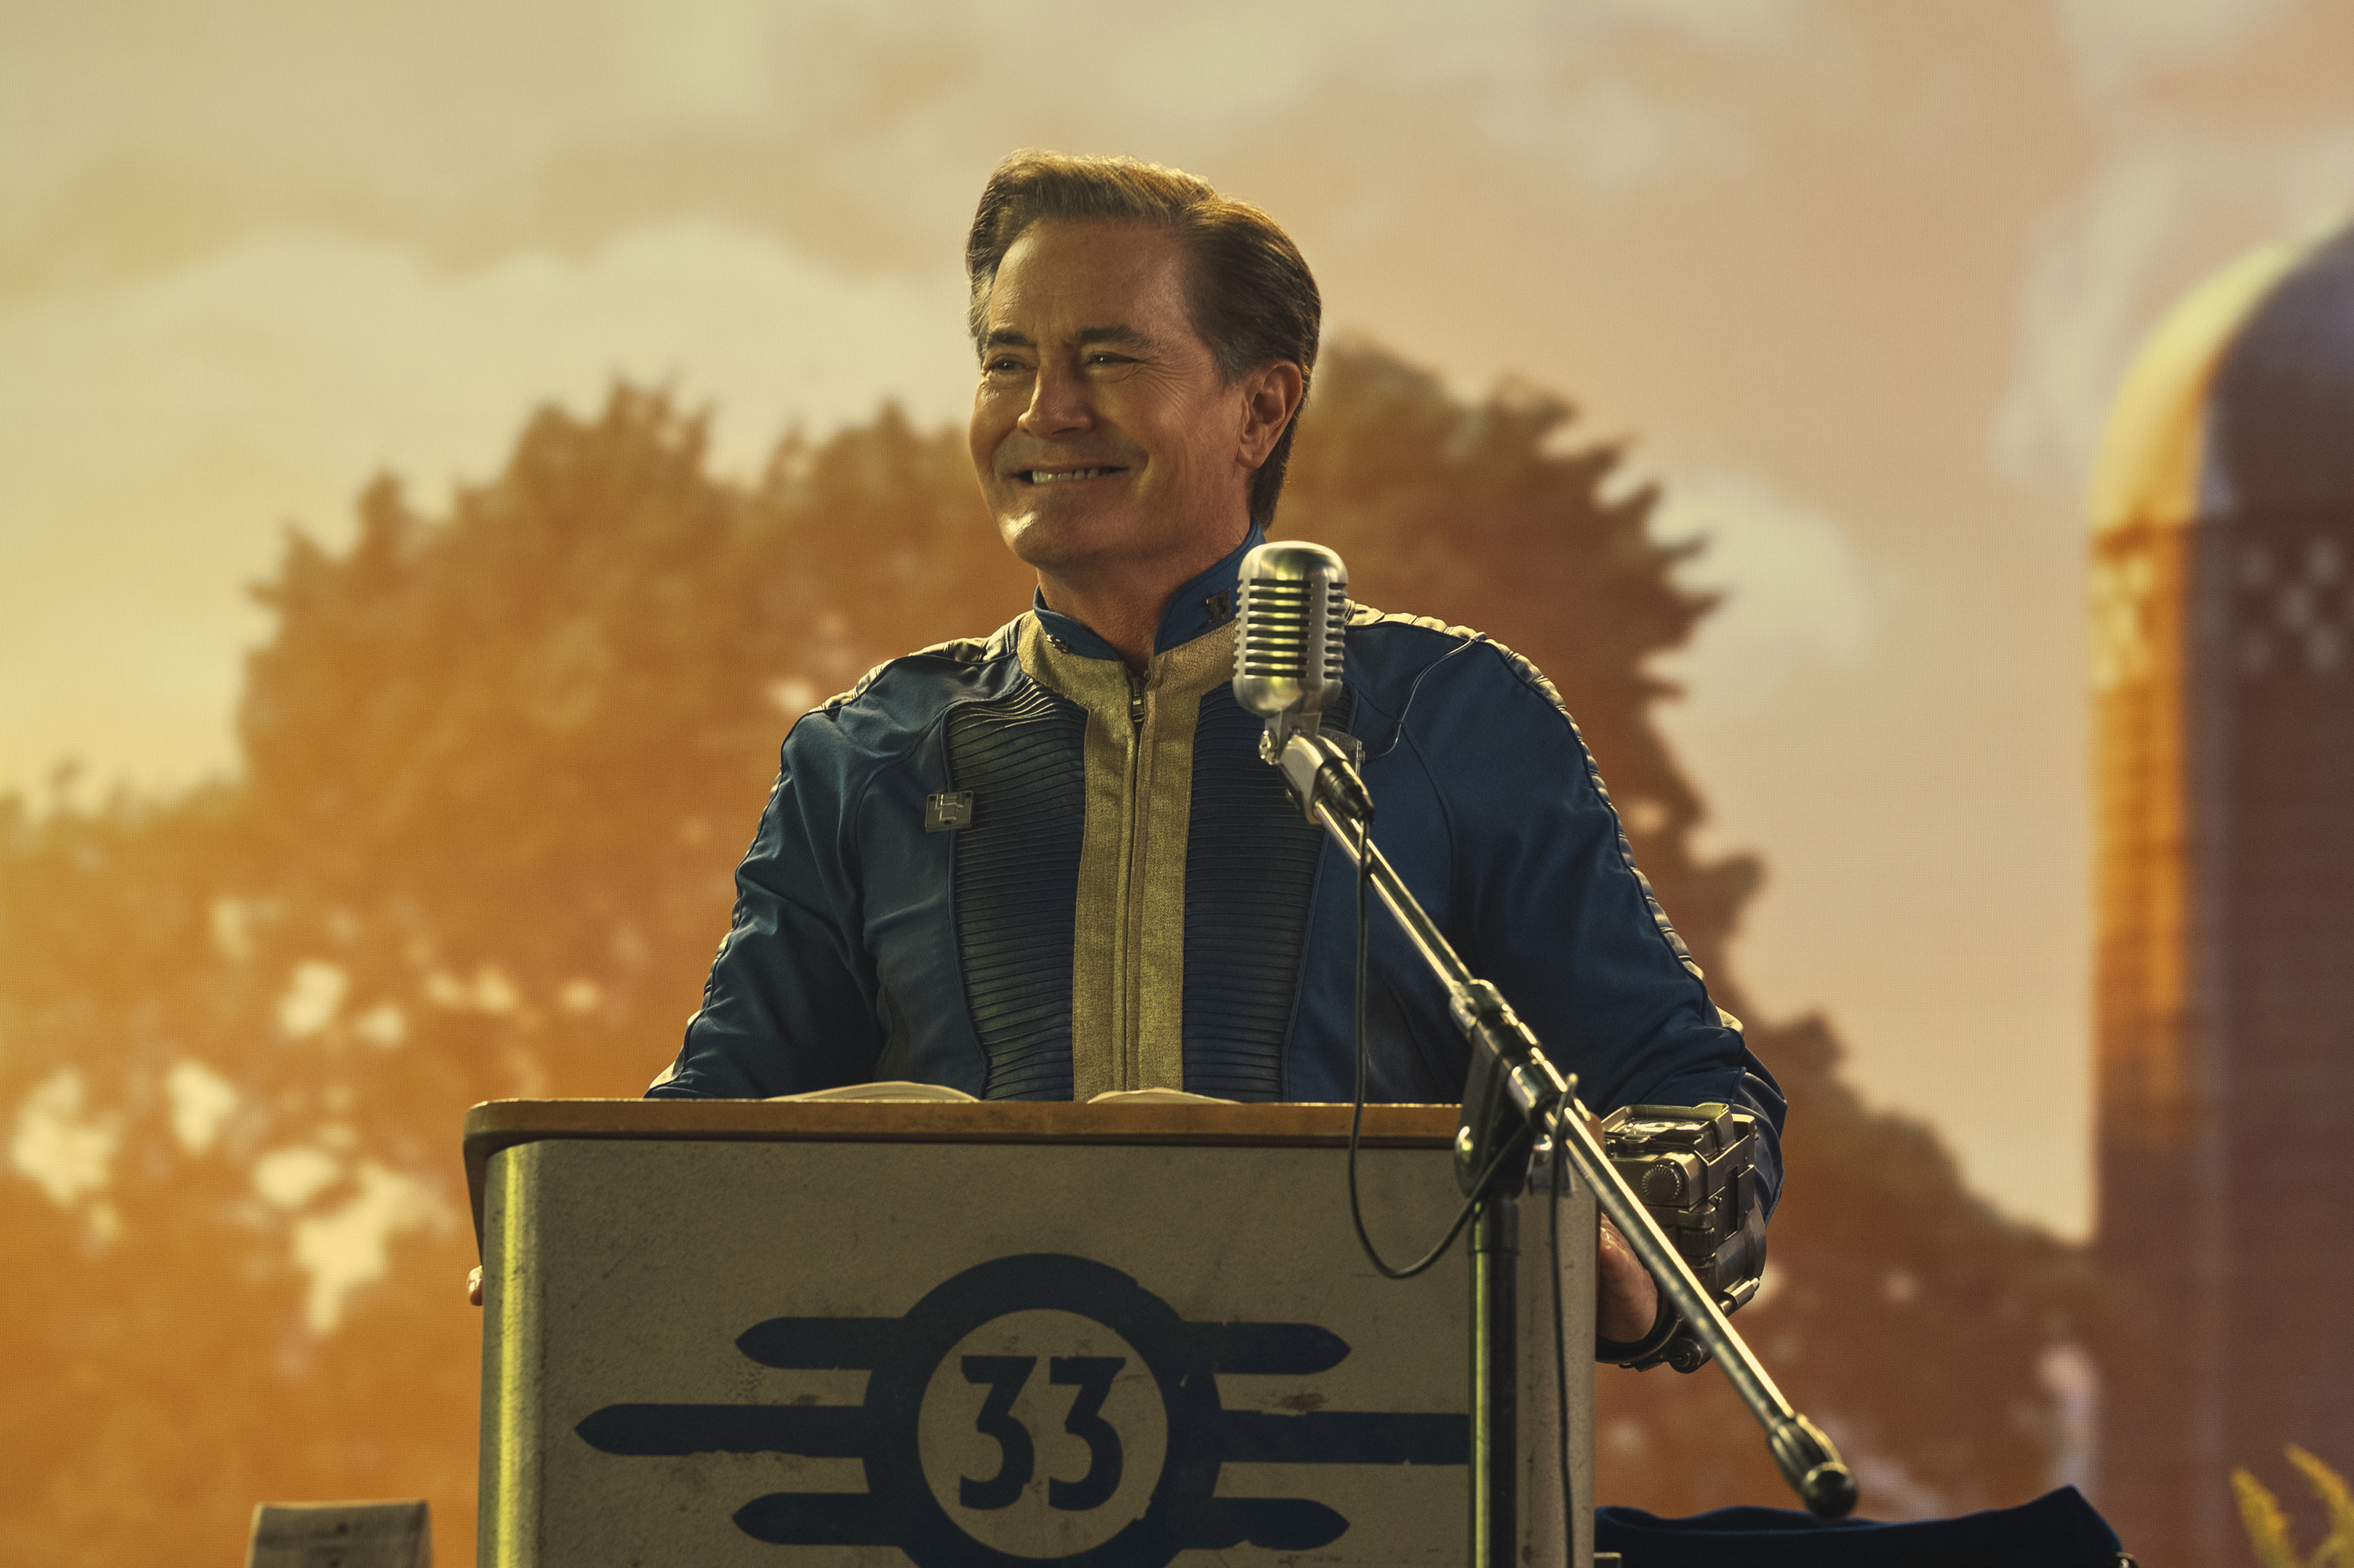 kyle maclachlan, standing at a podium with a microphone, in front of a projection of trees and a grain sill, in 'fallout'